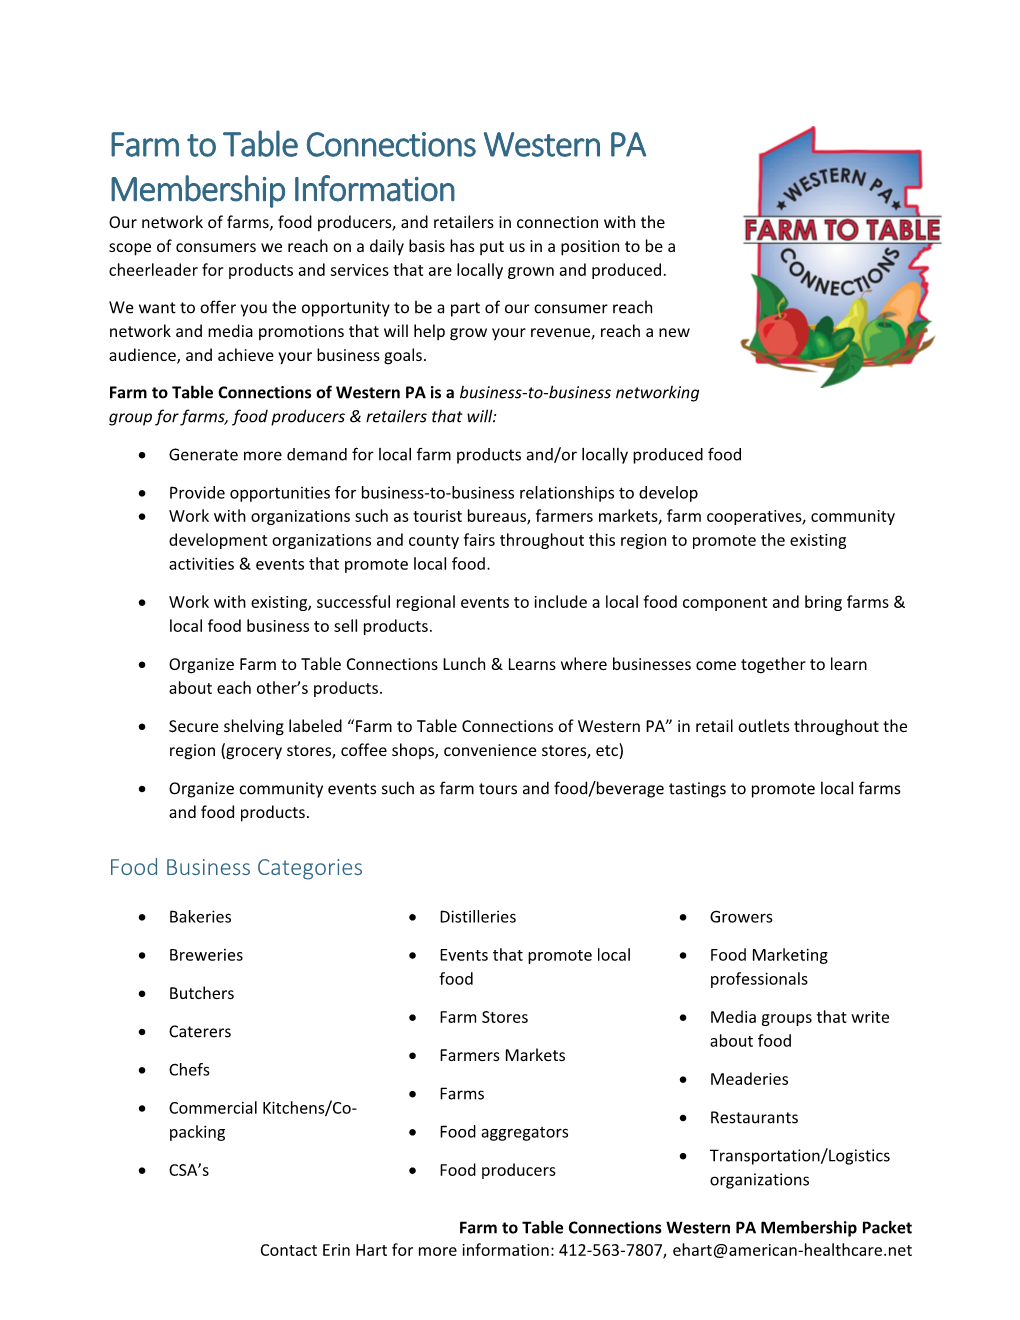 Farm to Table Connections Western PA Membership Information